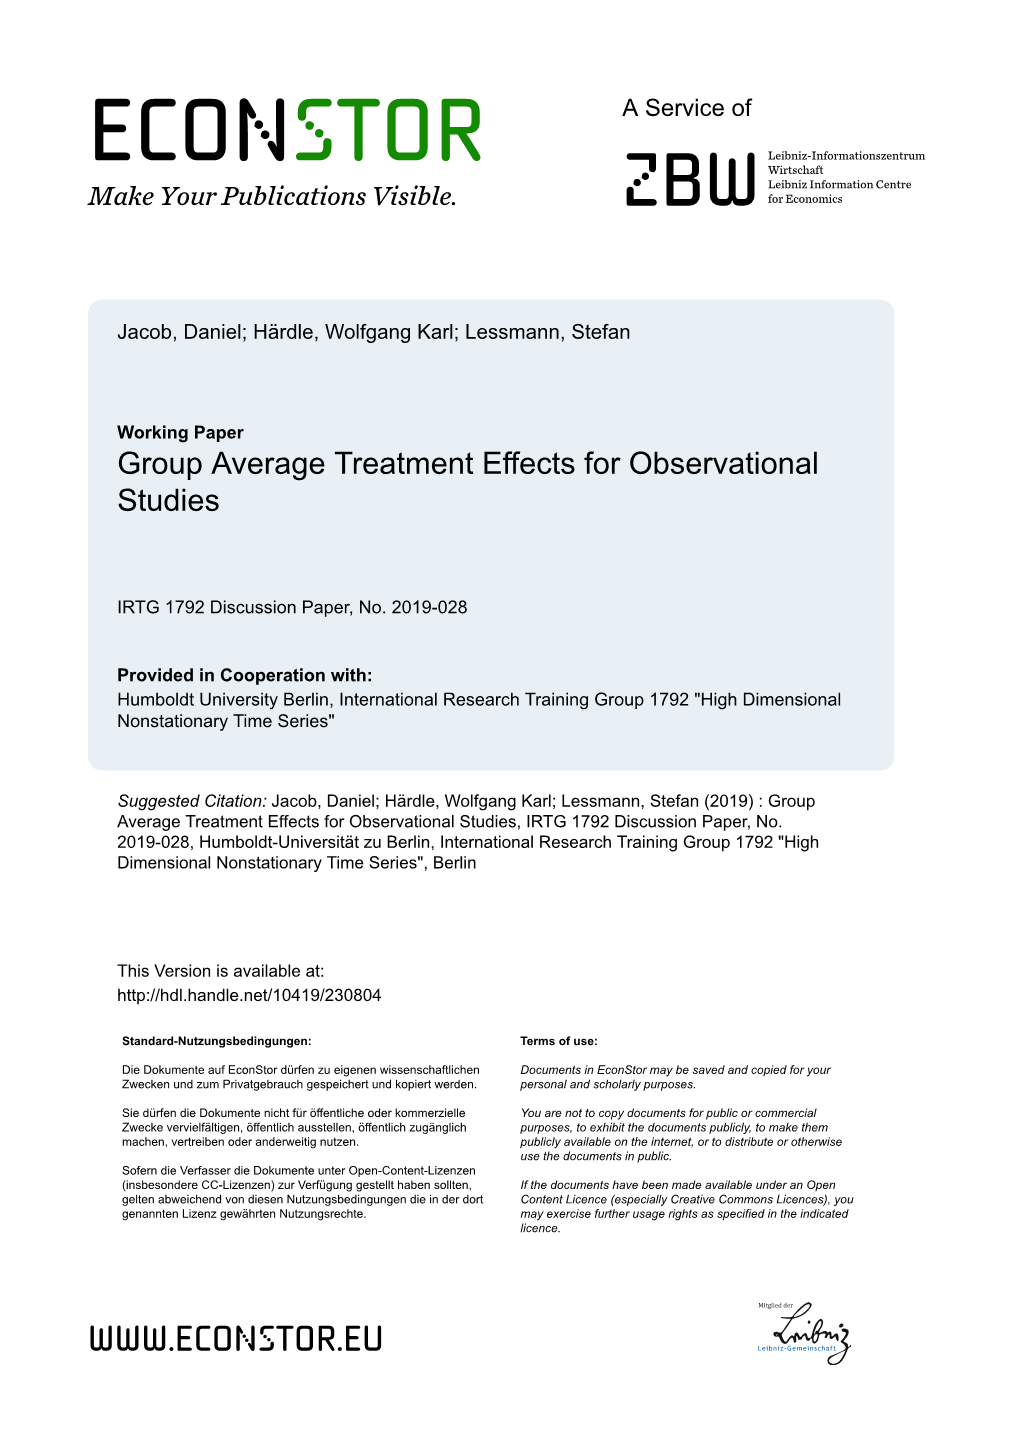 Group Average Treatment Effects for Observational Studies